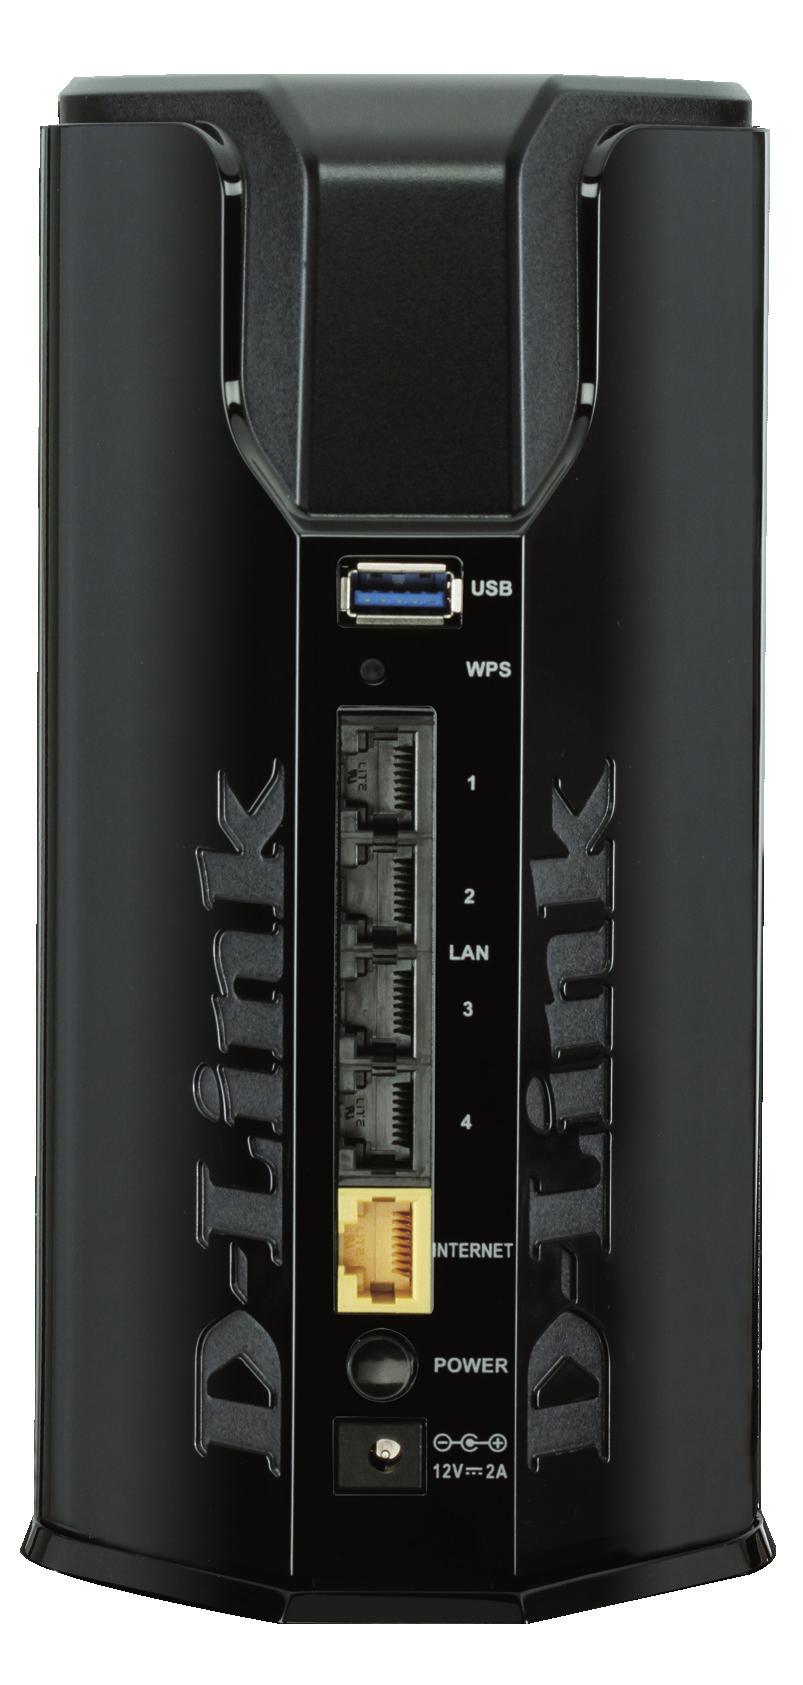 Section 1 - Product Overview Hardware Overview Connections 1 2 3 4 6 5 7 1 USB 3.0 Port Connect a USB flash drive to share content, or connect it to a USB printer to share it on your network.